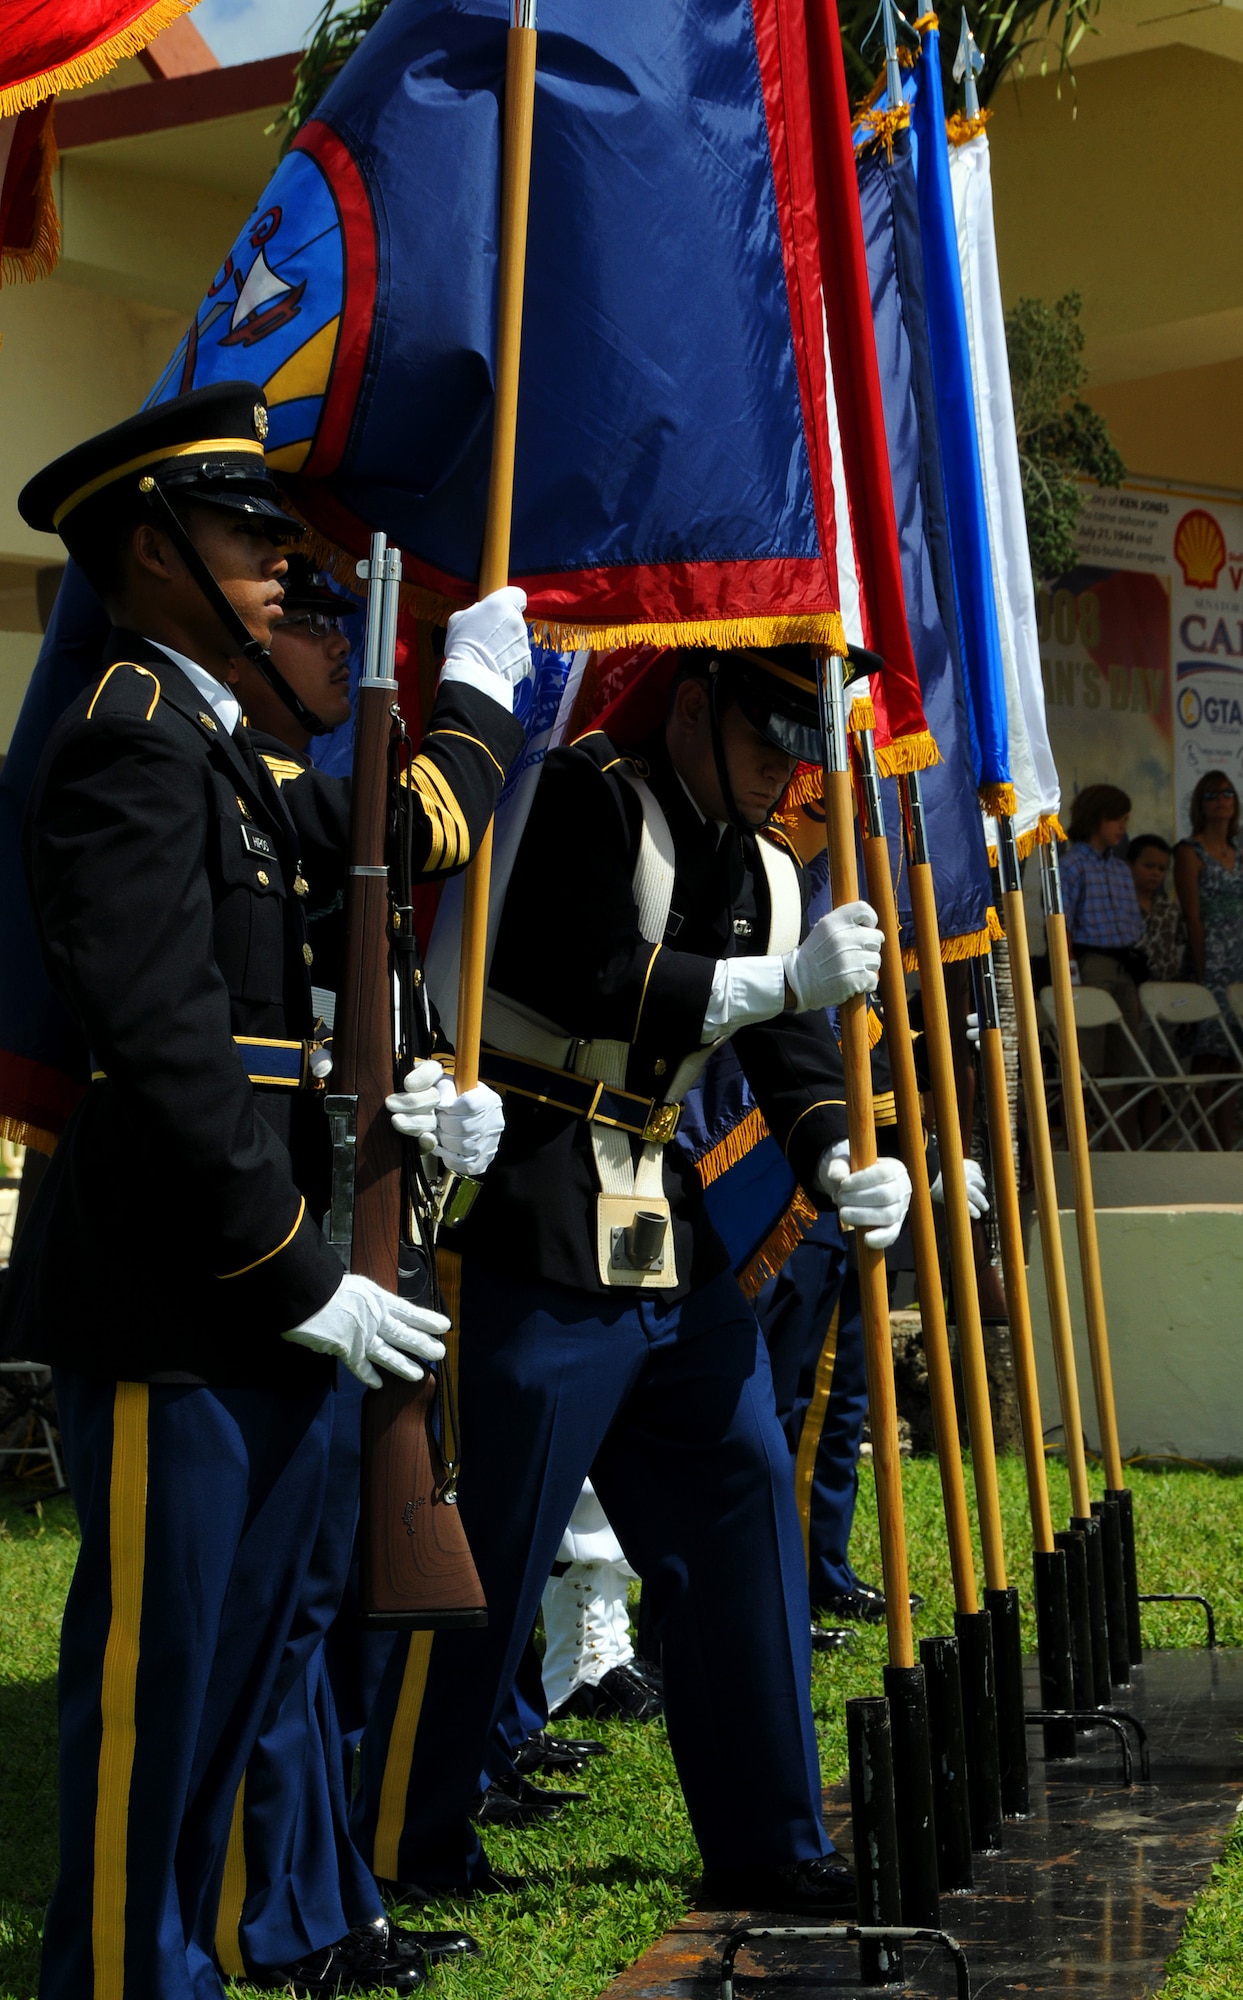 ANDERSEN AIR FORCE BASE, Guam - Joint Honor Guardsmen post the colors during the Veterans Day Ceremony at the Ricardo J. Bordallo Governors Complex in Adelup, Guam Nov. 11. Americans can reflect on the foresight, courage and sacrifices of past leaders and heroes and remember the courage and sacrifices of today's Soldiers, Sailors, Marines, Airmen, and Coast Guardsmen, who are fighting for freedom and providing humanitarian relief at home and overseas. (U.S. Air Force photo by Airman 1st Class Courtney Witt)